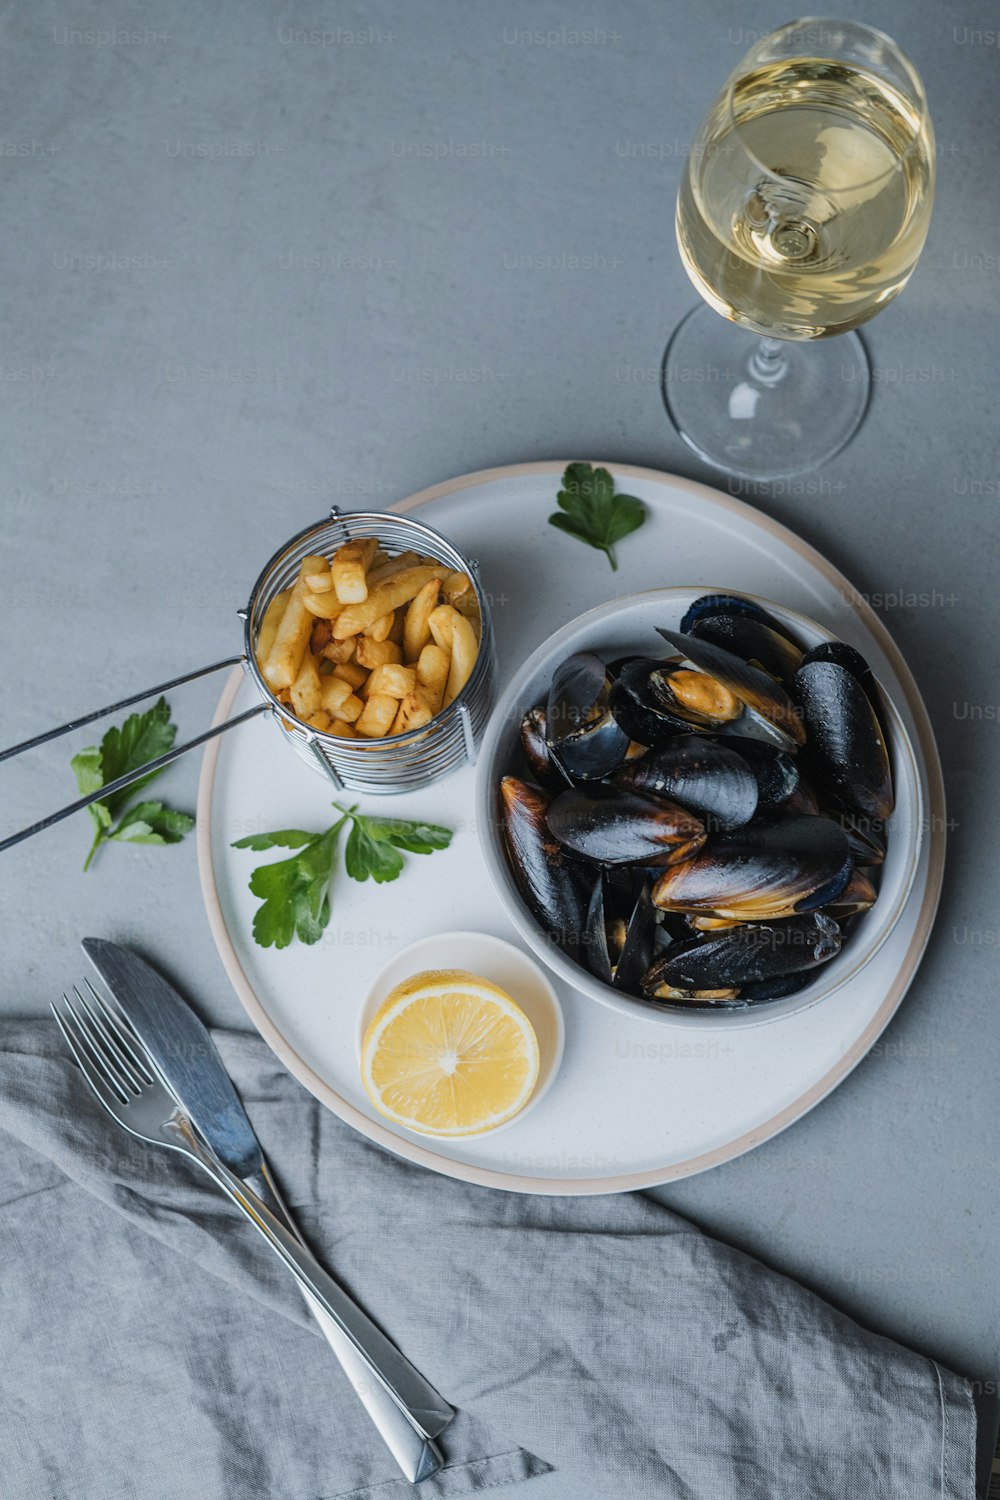 a plate of mussels and a glass of wine